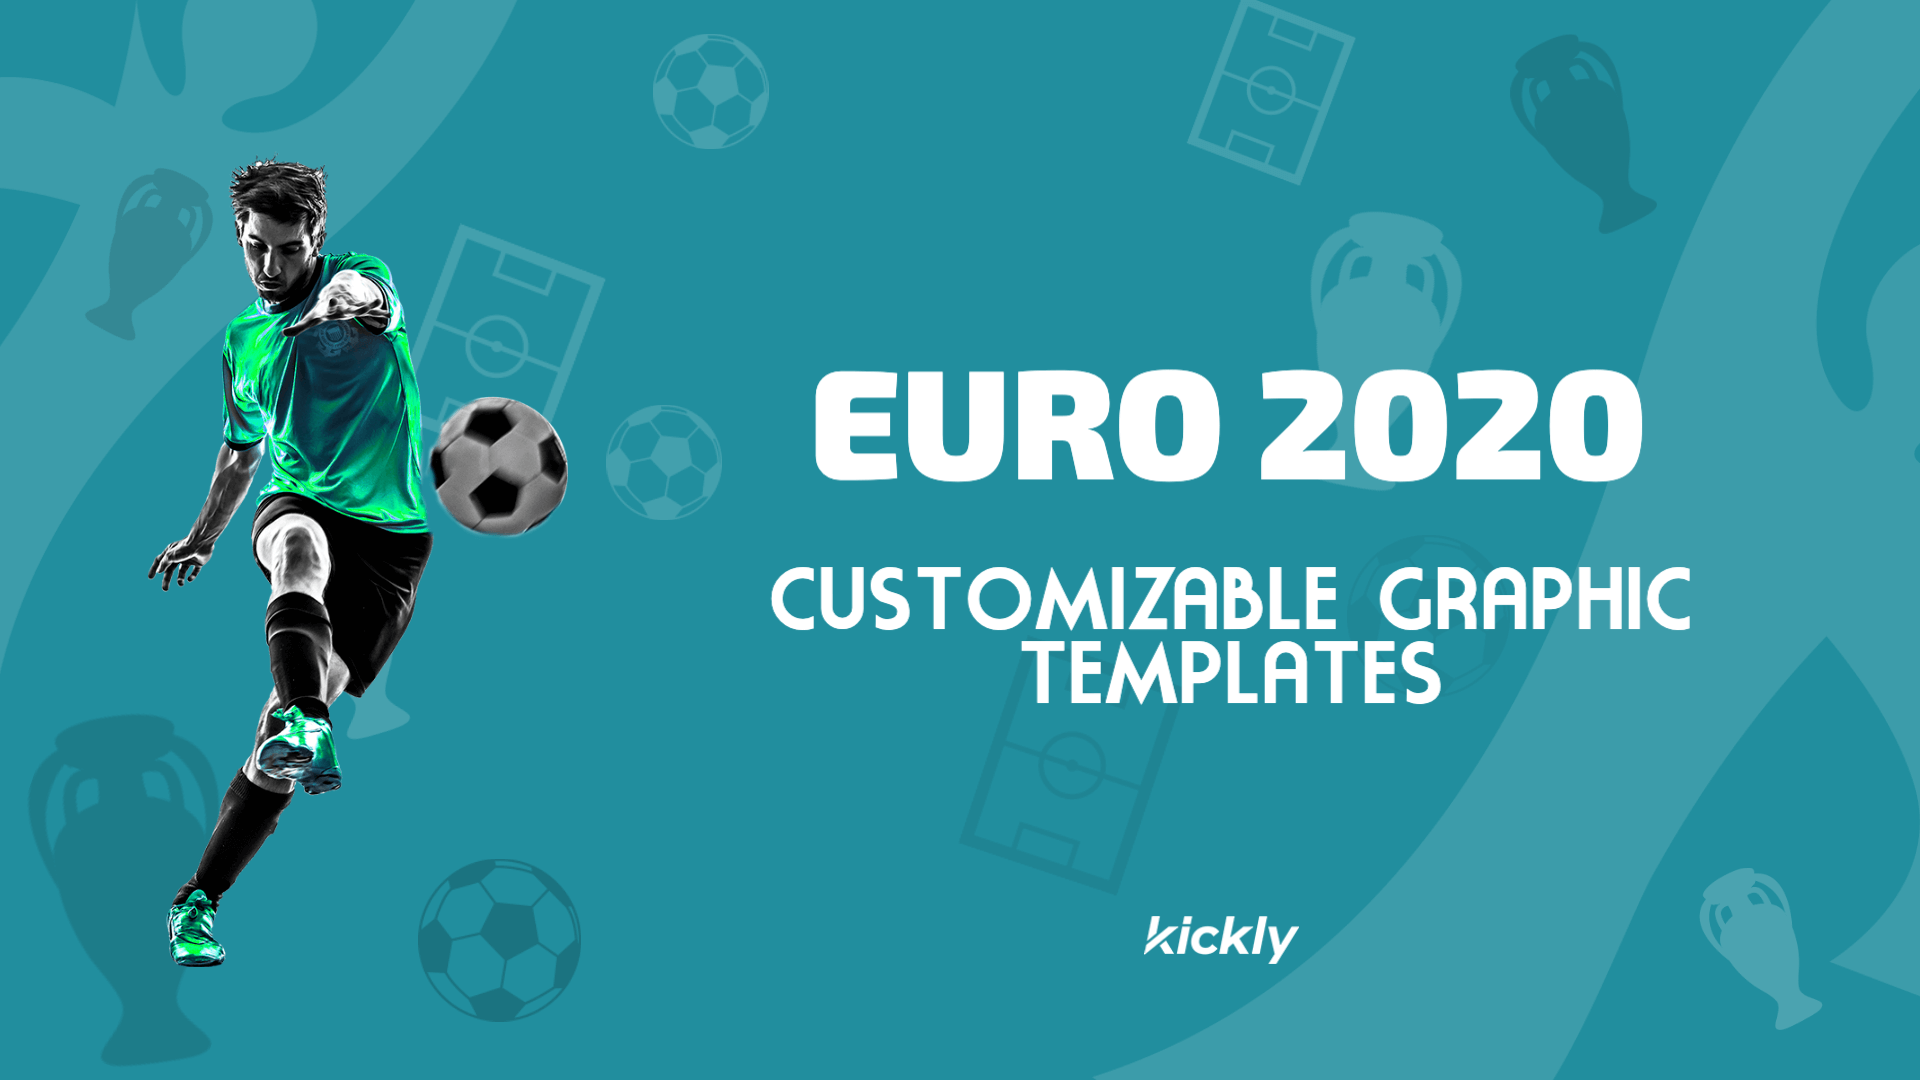 Customizable Graphic Templates for Euro 2020